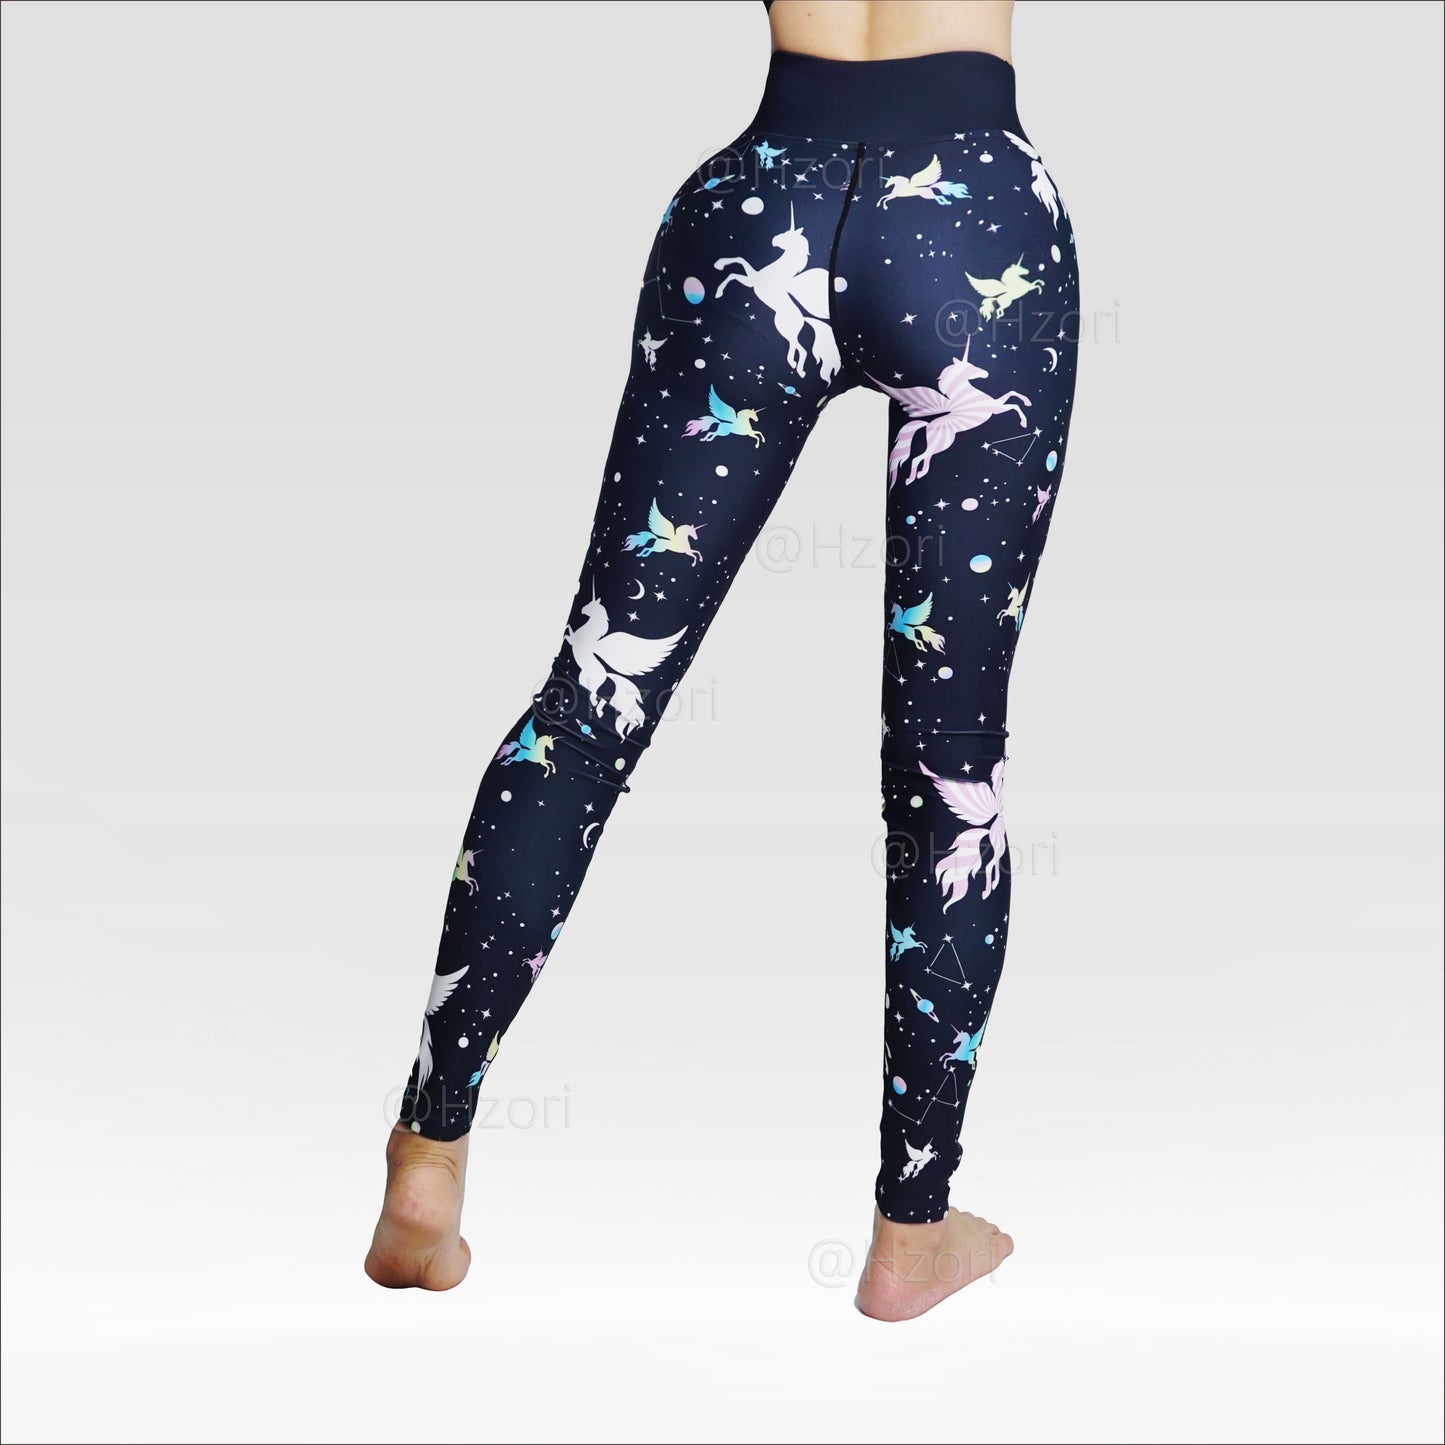 HZORI® |High Waist Printed Yoga Pants for Women, Tummy Control Running Sports Workout Yoga Leggings | Constellation Element Style